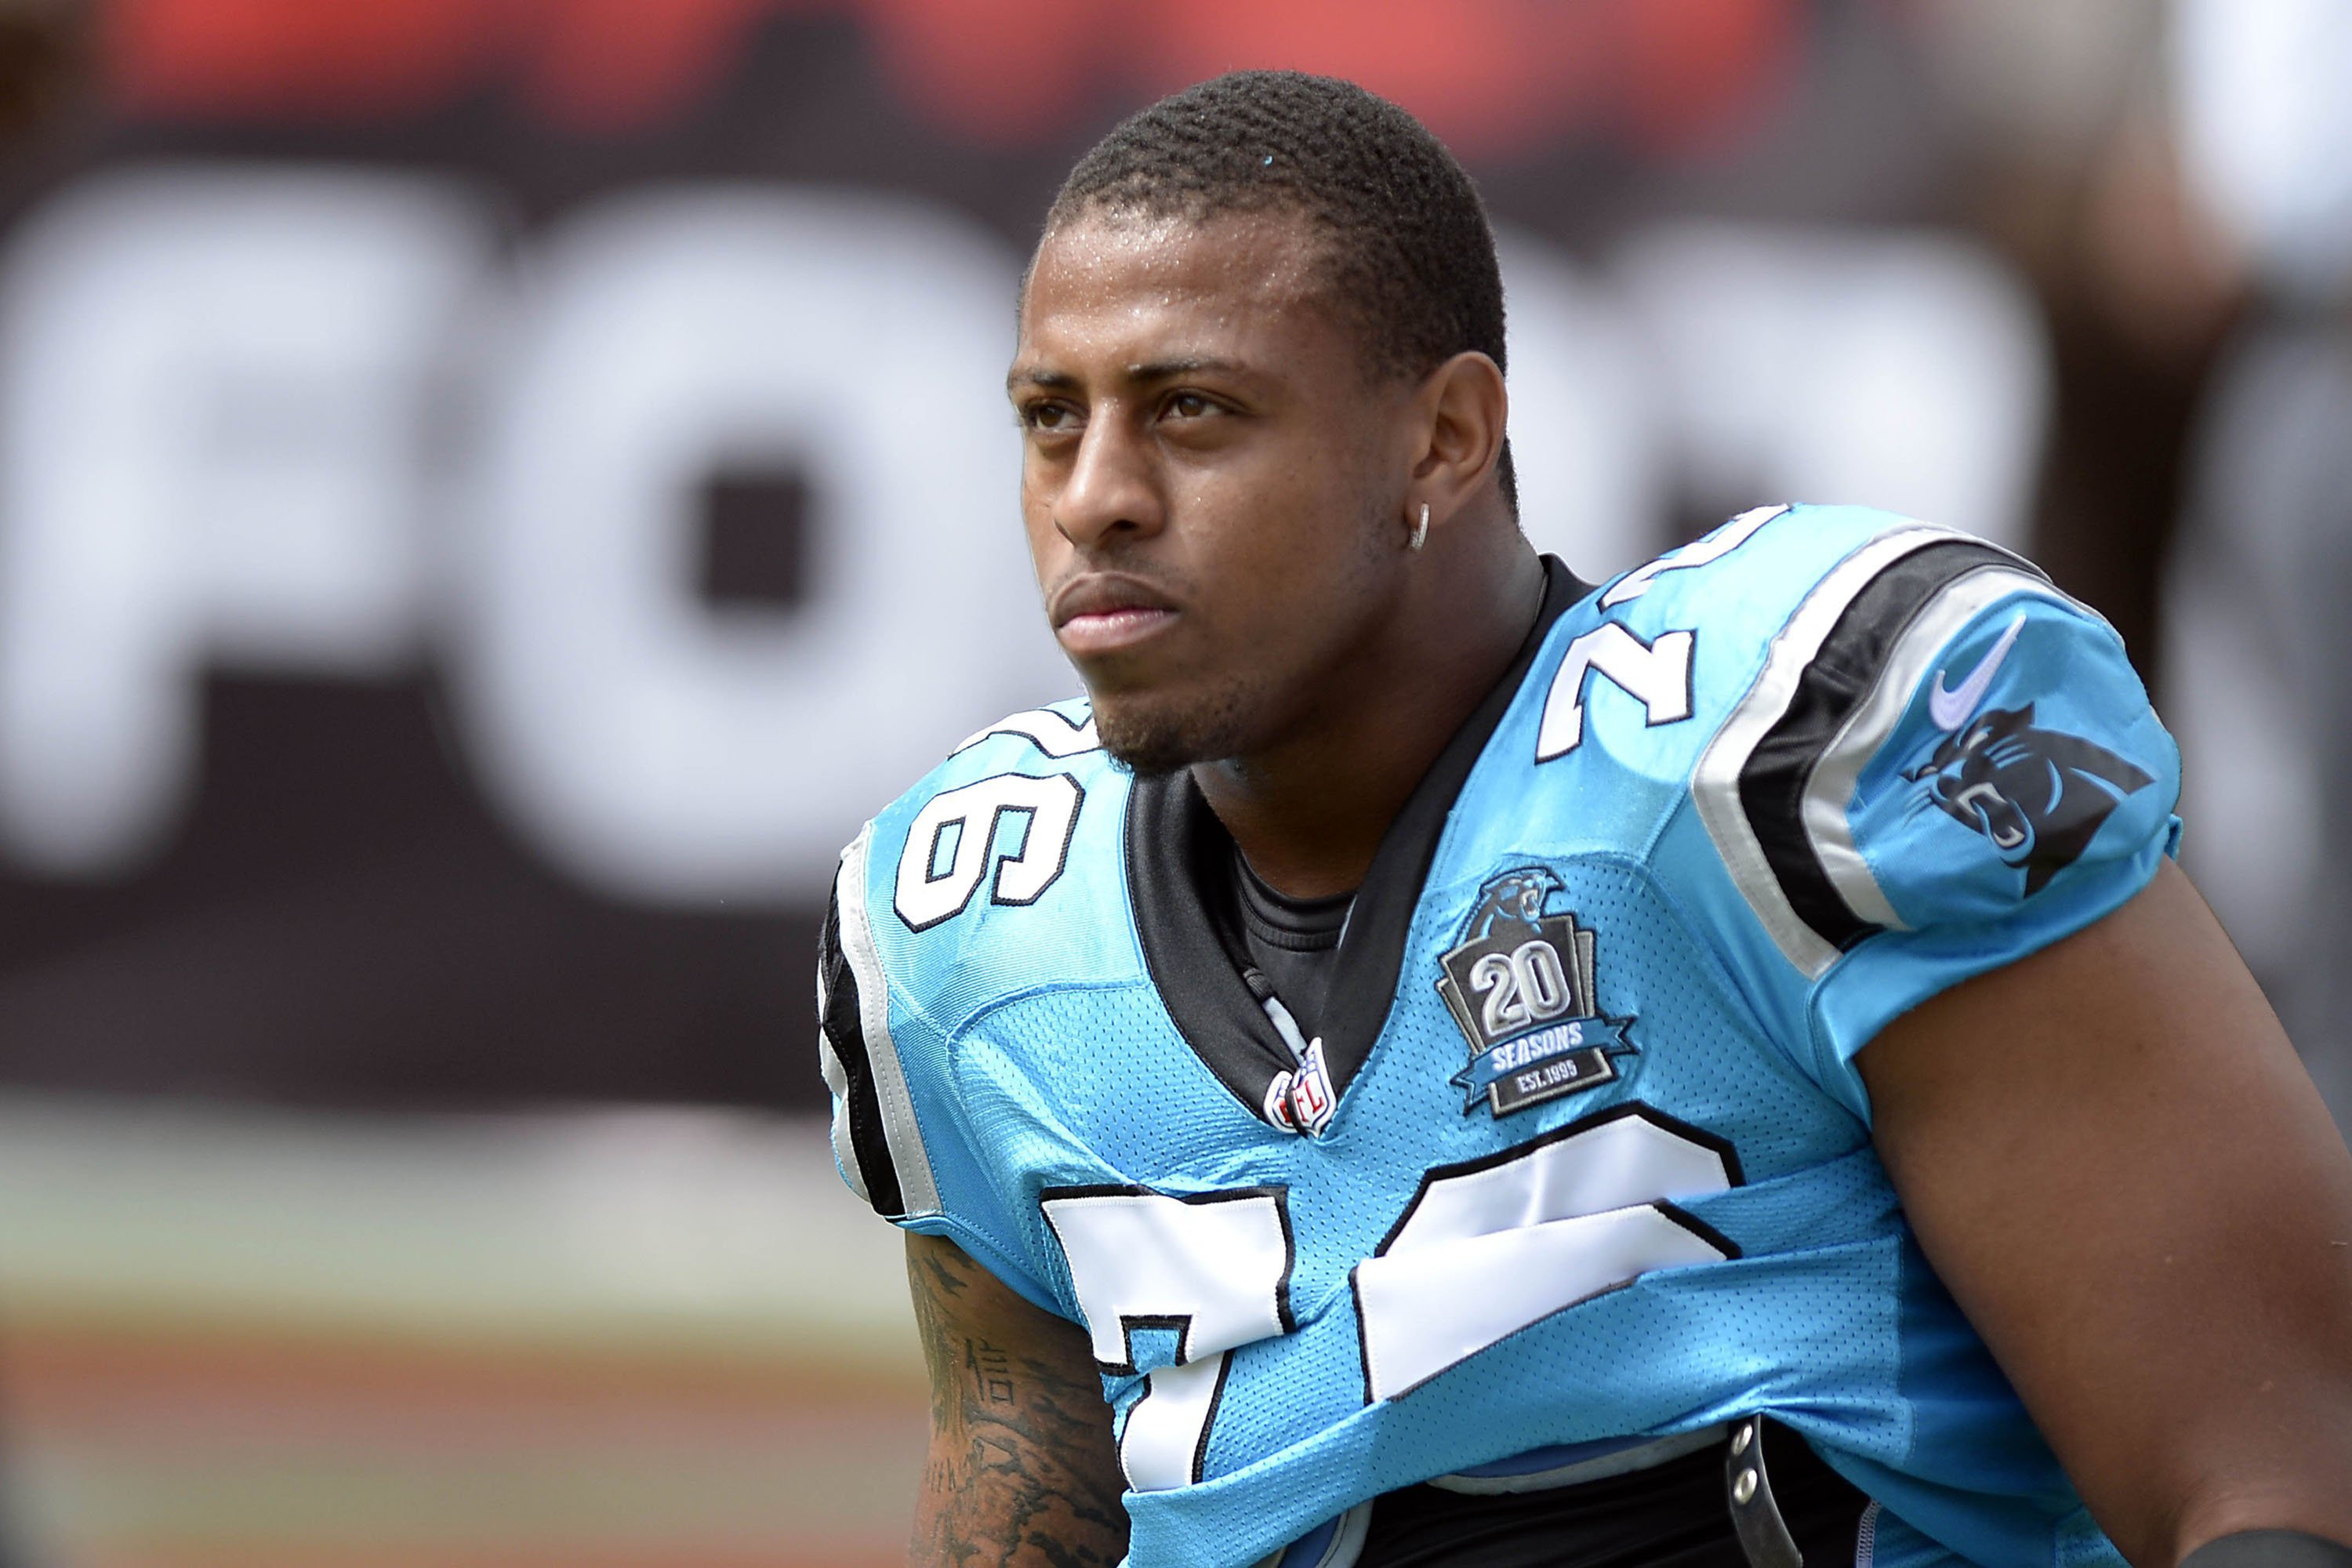 Greg Hardy of the Carolina Panthers looks out on the field during a game against the Tampa Bay Buccaneers on Sept. 7, 2014 in Tampa, Fla. (Charlotte Observer—Getty Images)